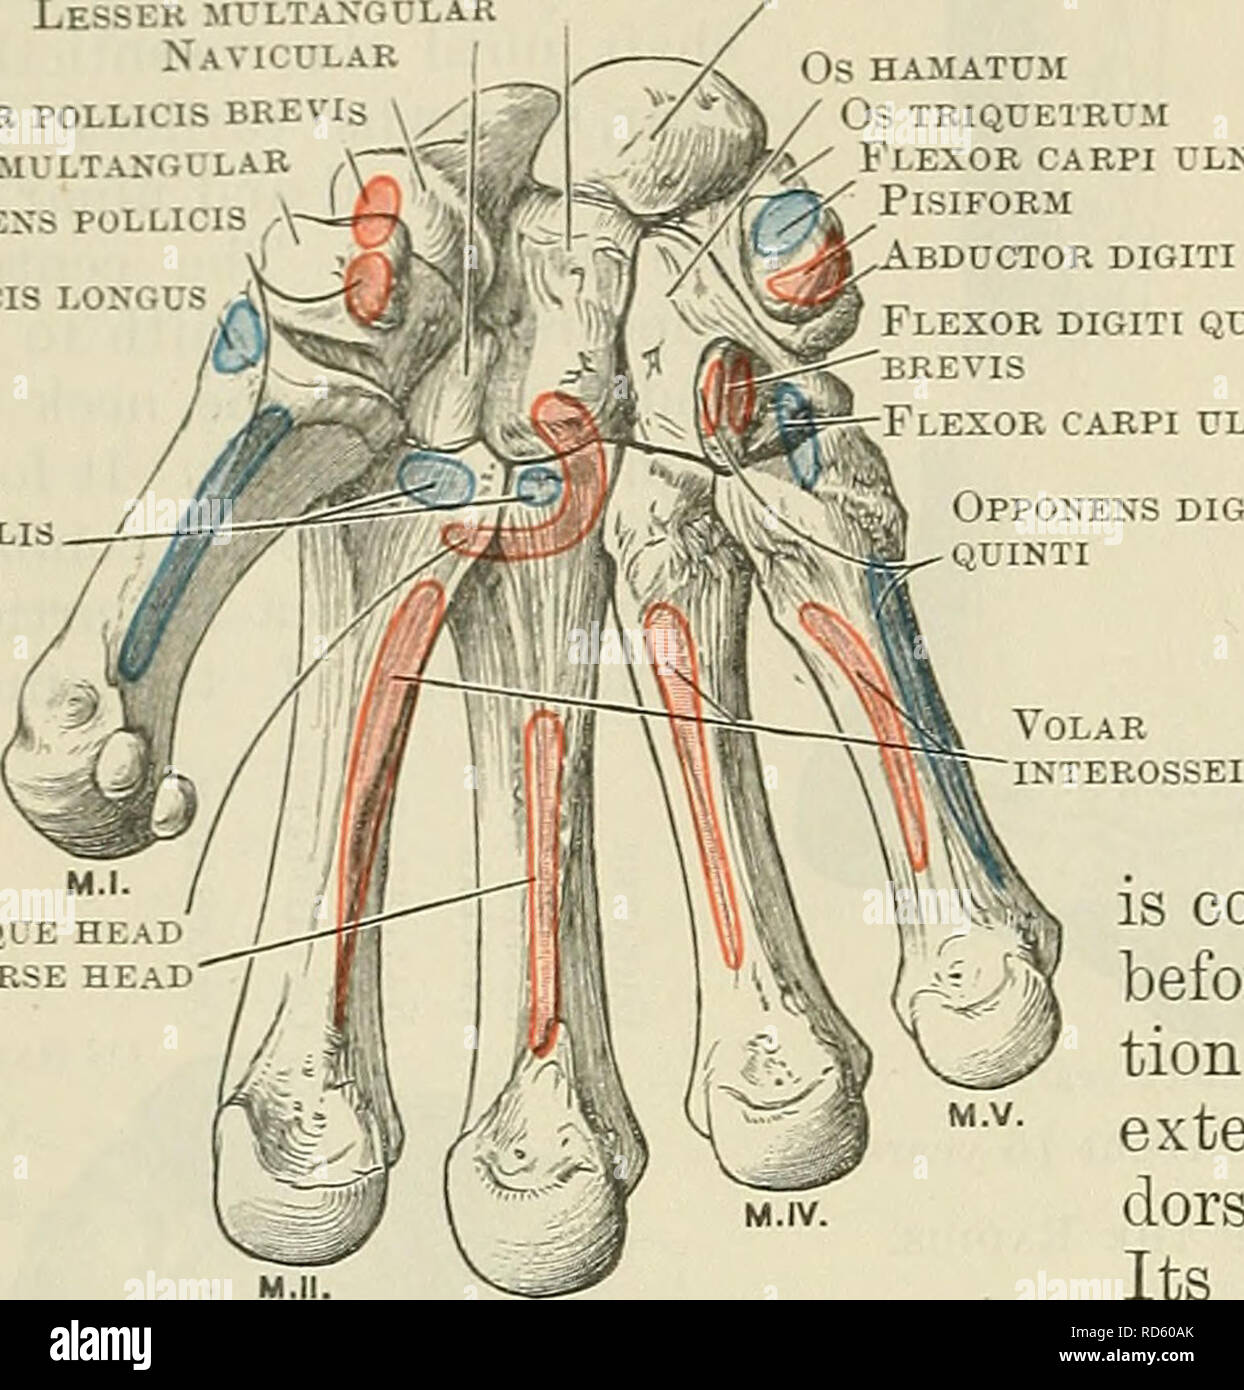 . Cunningham's Text-book of anatomy. Anatomy. 218 OSTEOLOGY. os capitatum Lesser multangular Navicular Abductor pollicis brevis  Greater multangular Opponens POLLICIS Abductor pollicis i.ongus Flexor carpi radialis Oa lunatum Os HAMATUM Os triquetrum tys Flexor carpi ulnaris Pisiform Abductor digiti quinti Flexor digiti quinti BREVIS Flexor carpi ulnaris Opponens digiti quinti Adductor f Oblique head pollicis  Transverse head. Fig. 210.—Volar Aspect of Bootes of the Right Carpus and metacarpus with muscular attachments mapped out. os hamatum (O.T. unciform). Irregularly six-sided, each of th Stock Photo